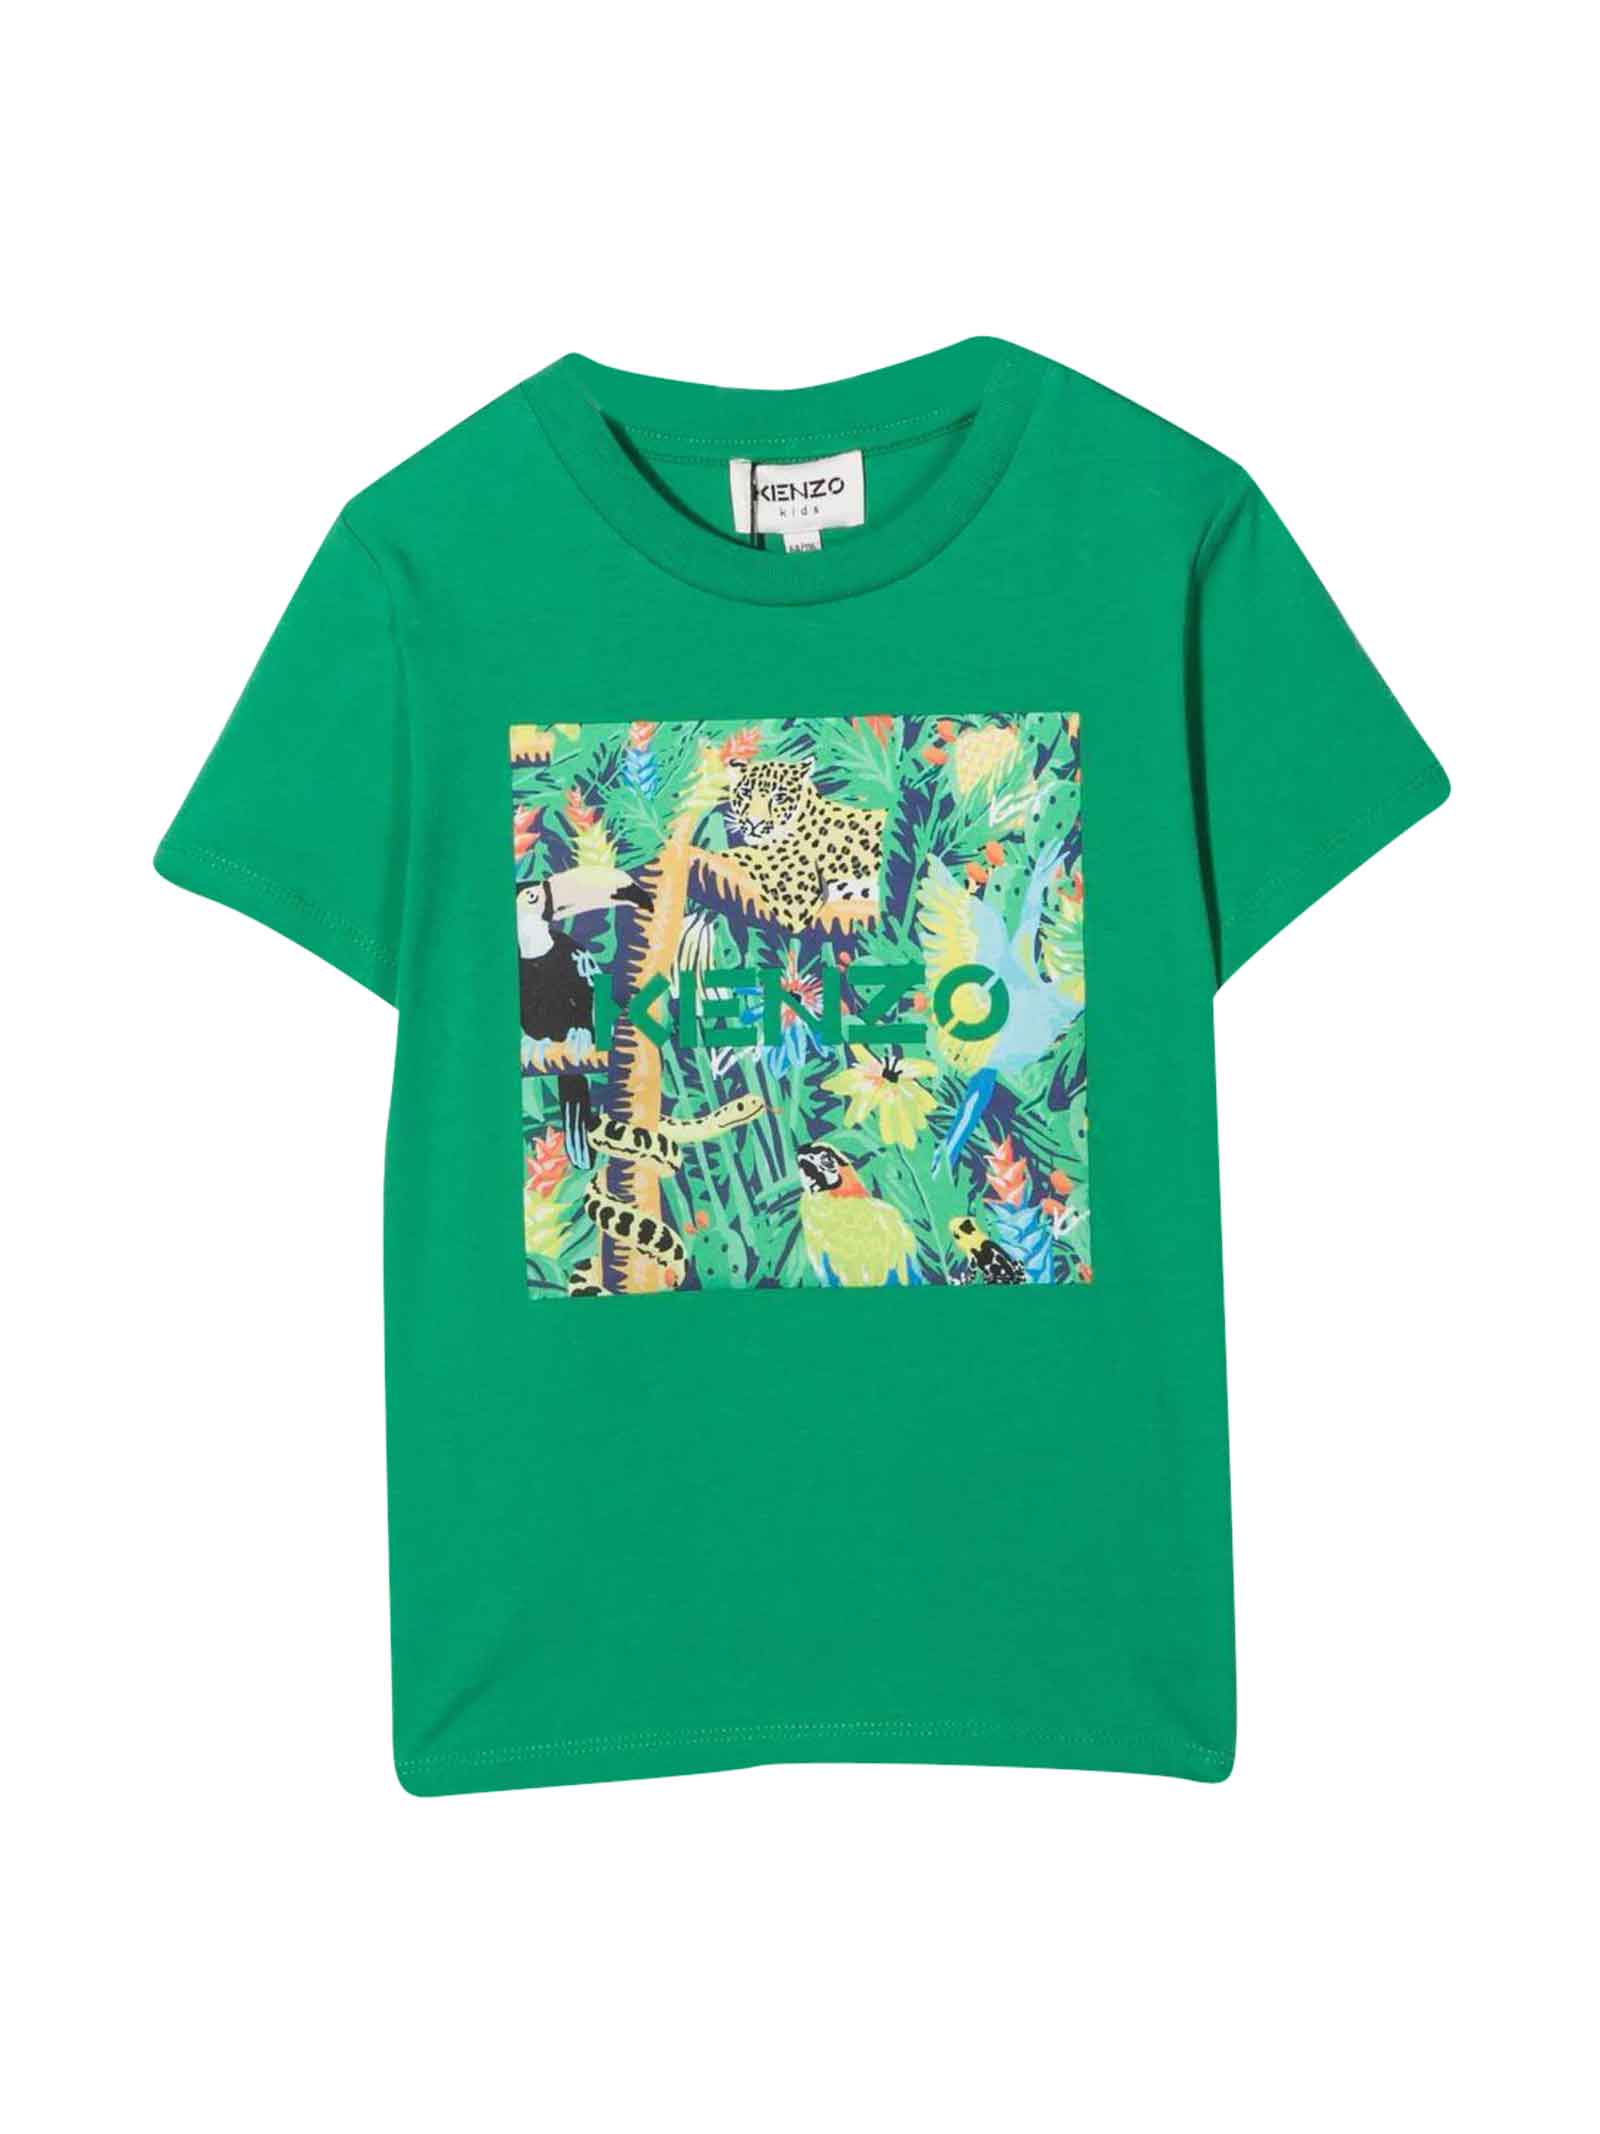 Kenzo Kids Green Unisex T-shirt With Botanical Print On The Front, Round Neckline, Short Sleeves And Straight Hem By.